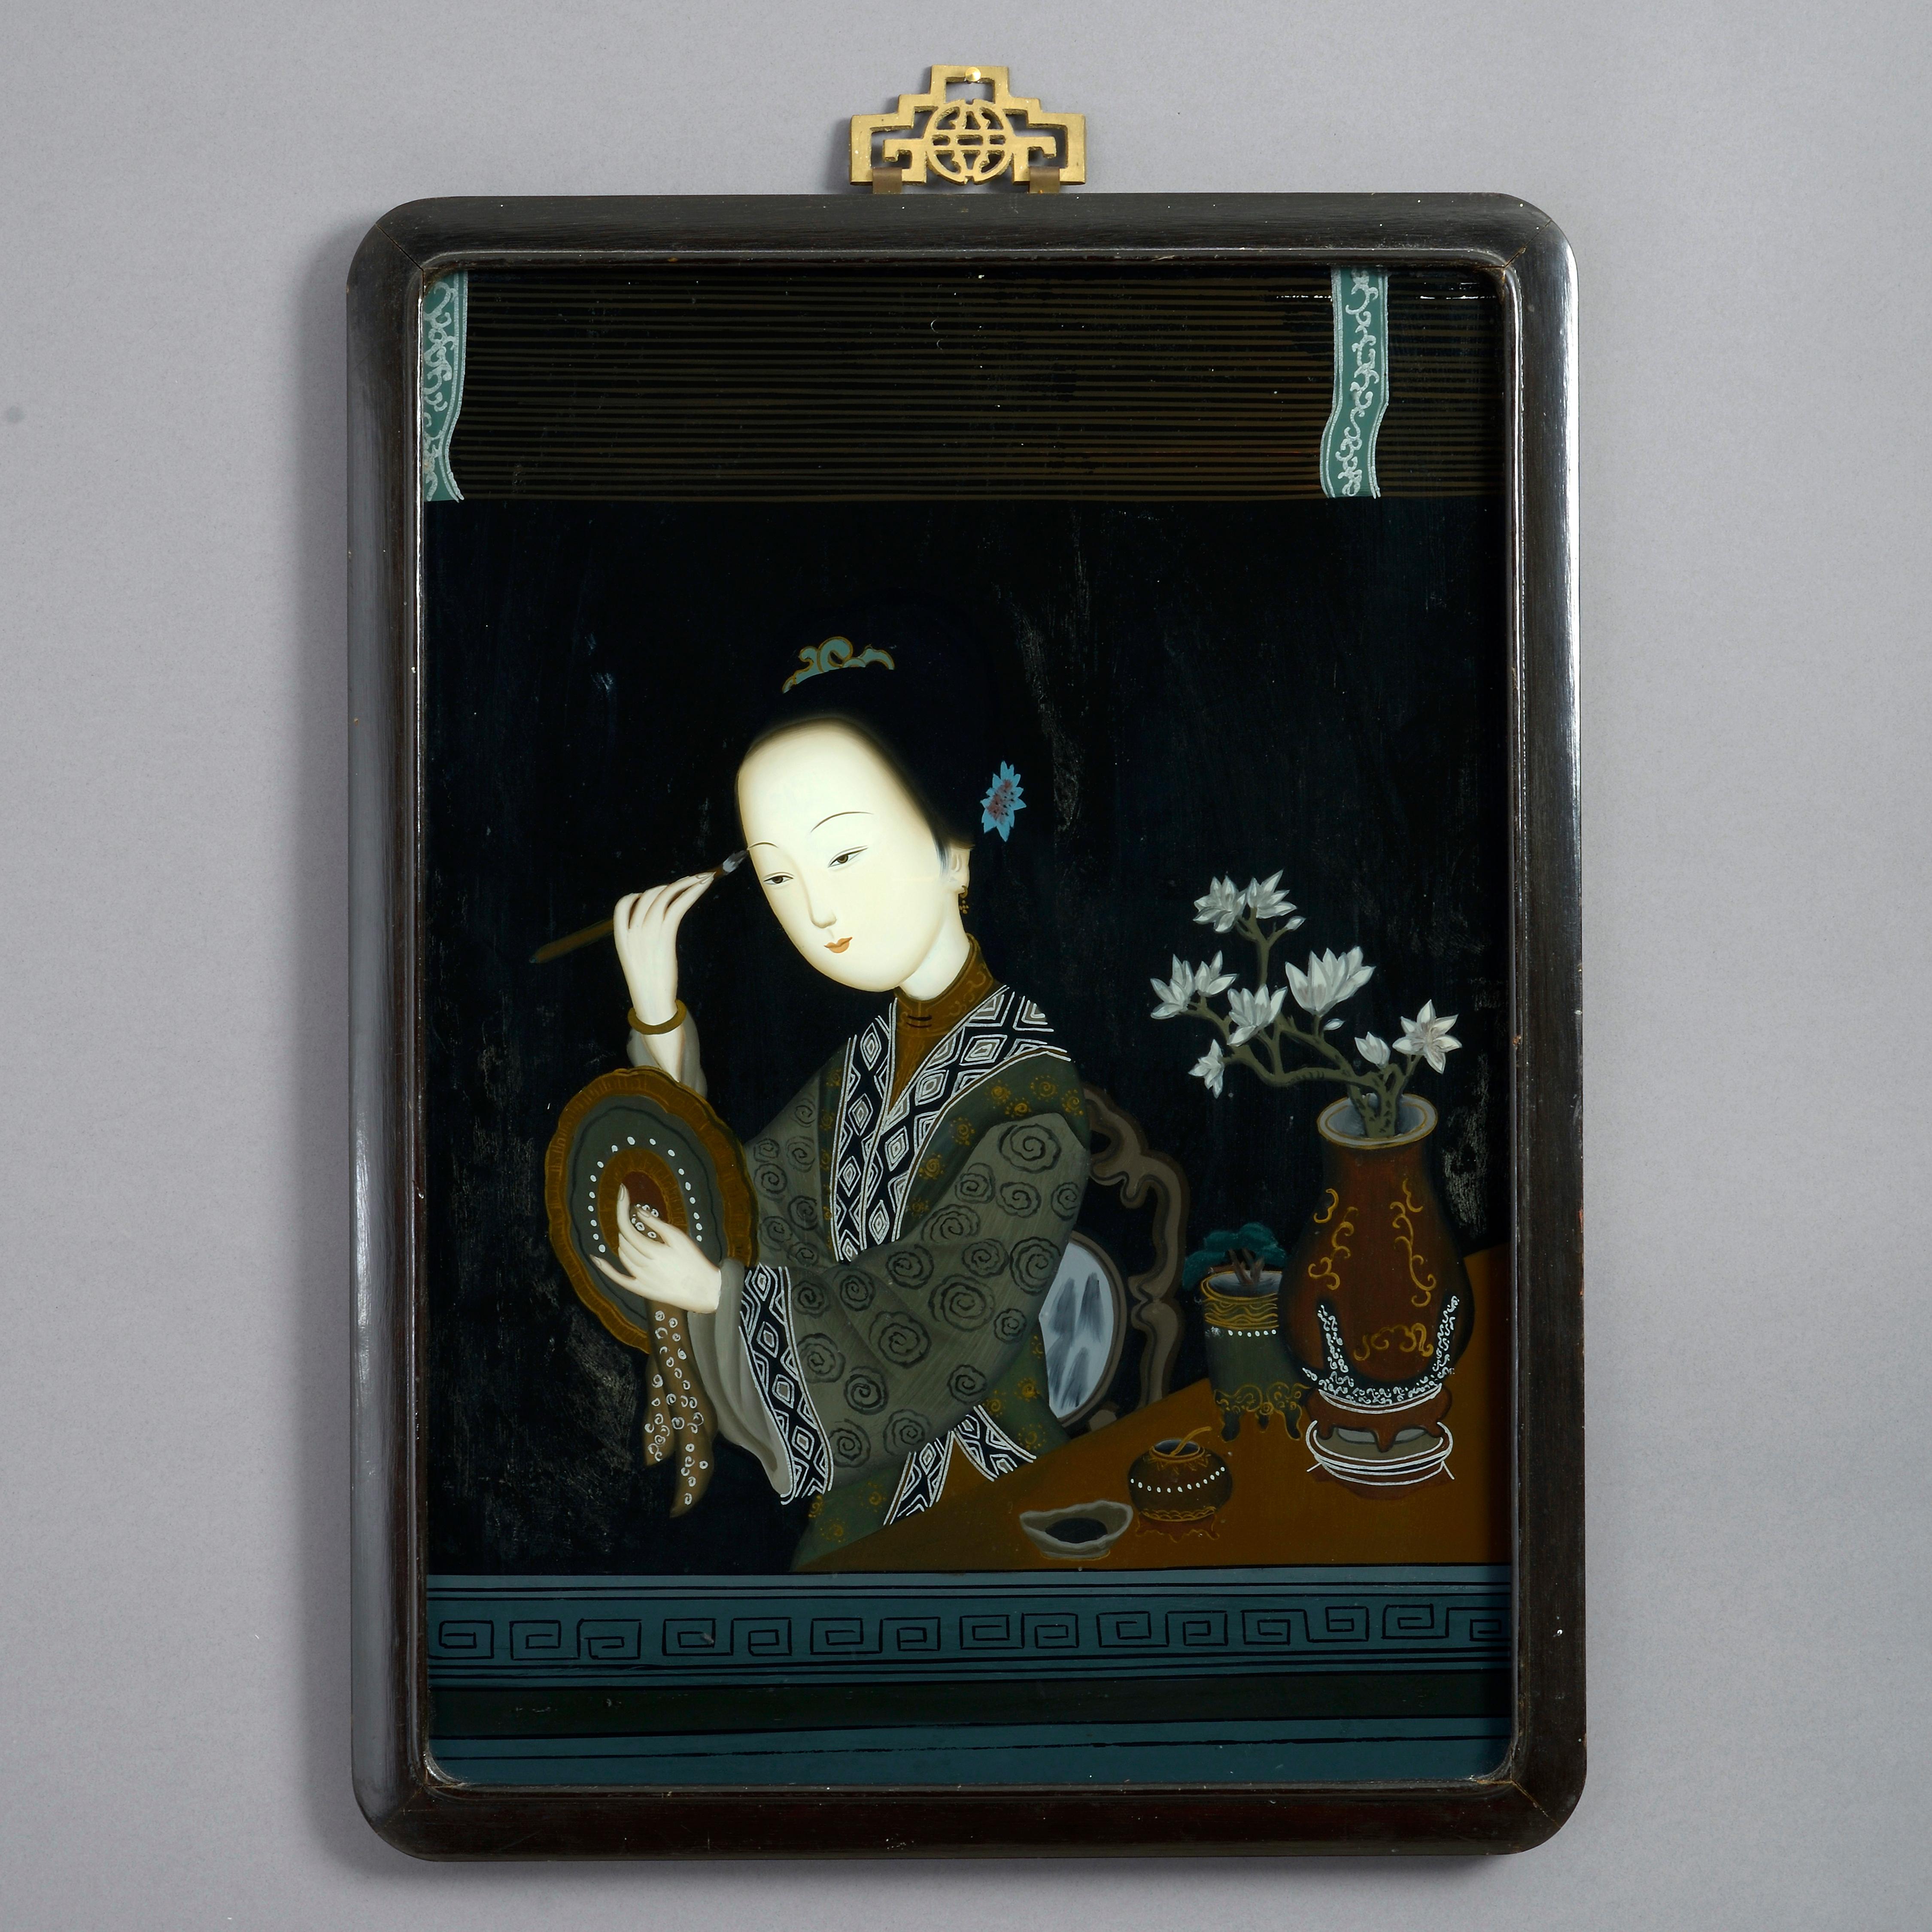 A pair of late nineteenth century Chinese Export reverse glass portraits, each depicting a noblewoman, one plucking a stringed instrument before a mountainous landscape; the other attending to her hair within an interior setting.

